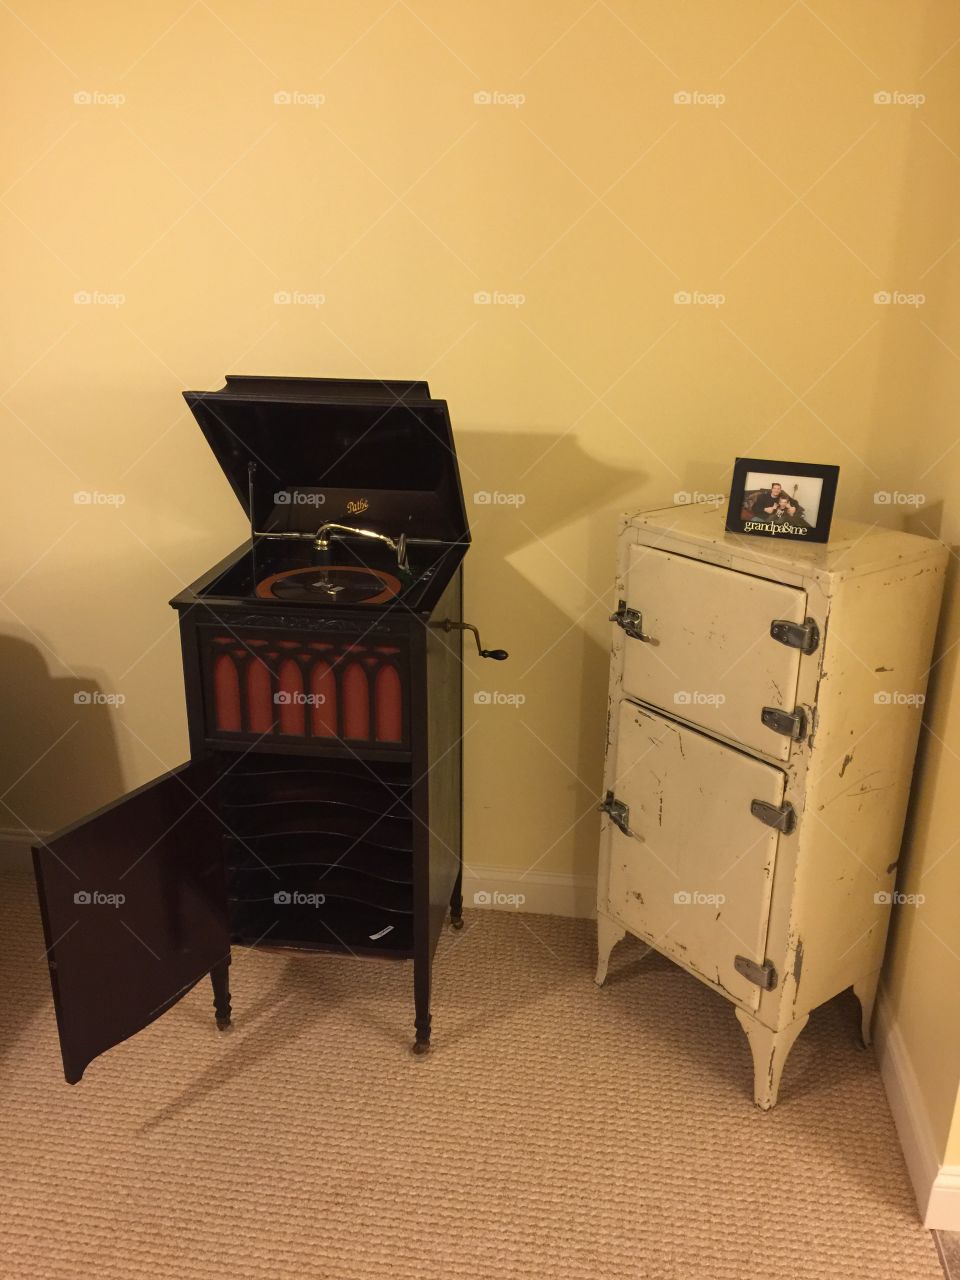 My phonograph and ice box